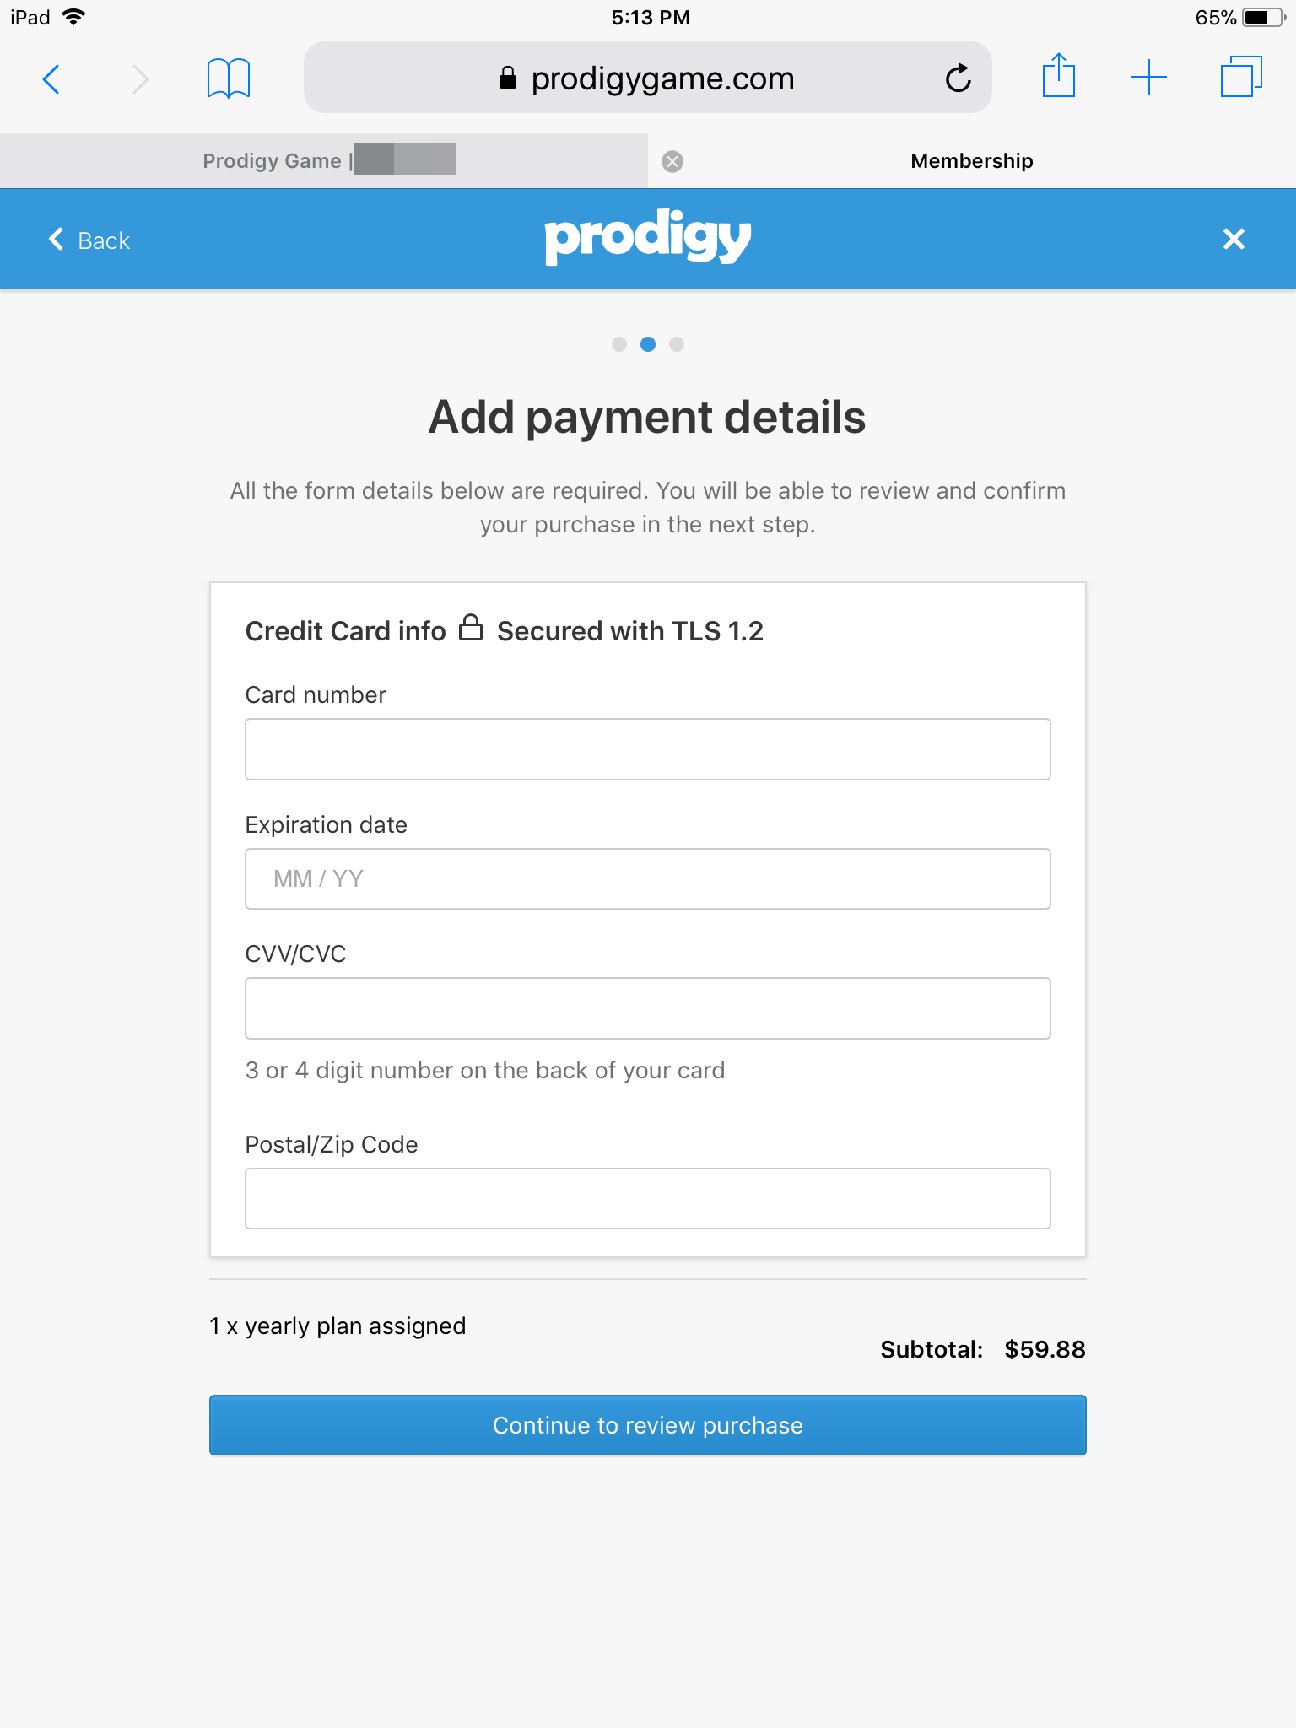 how to cancel prodigy membership